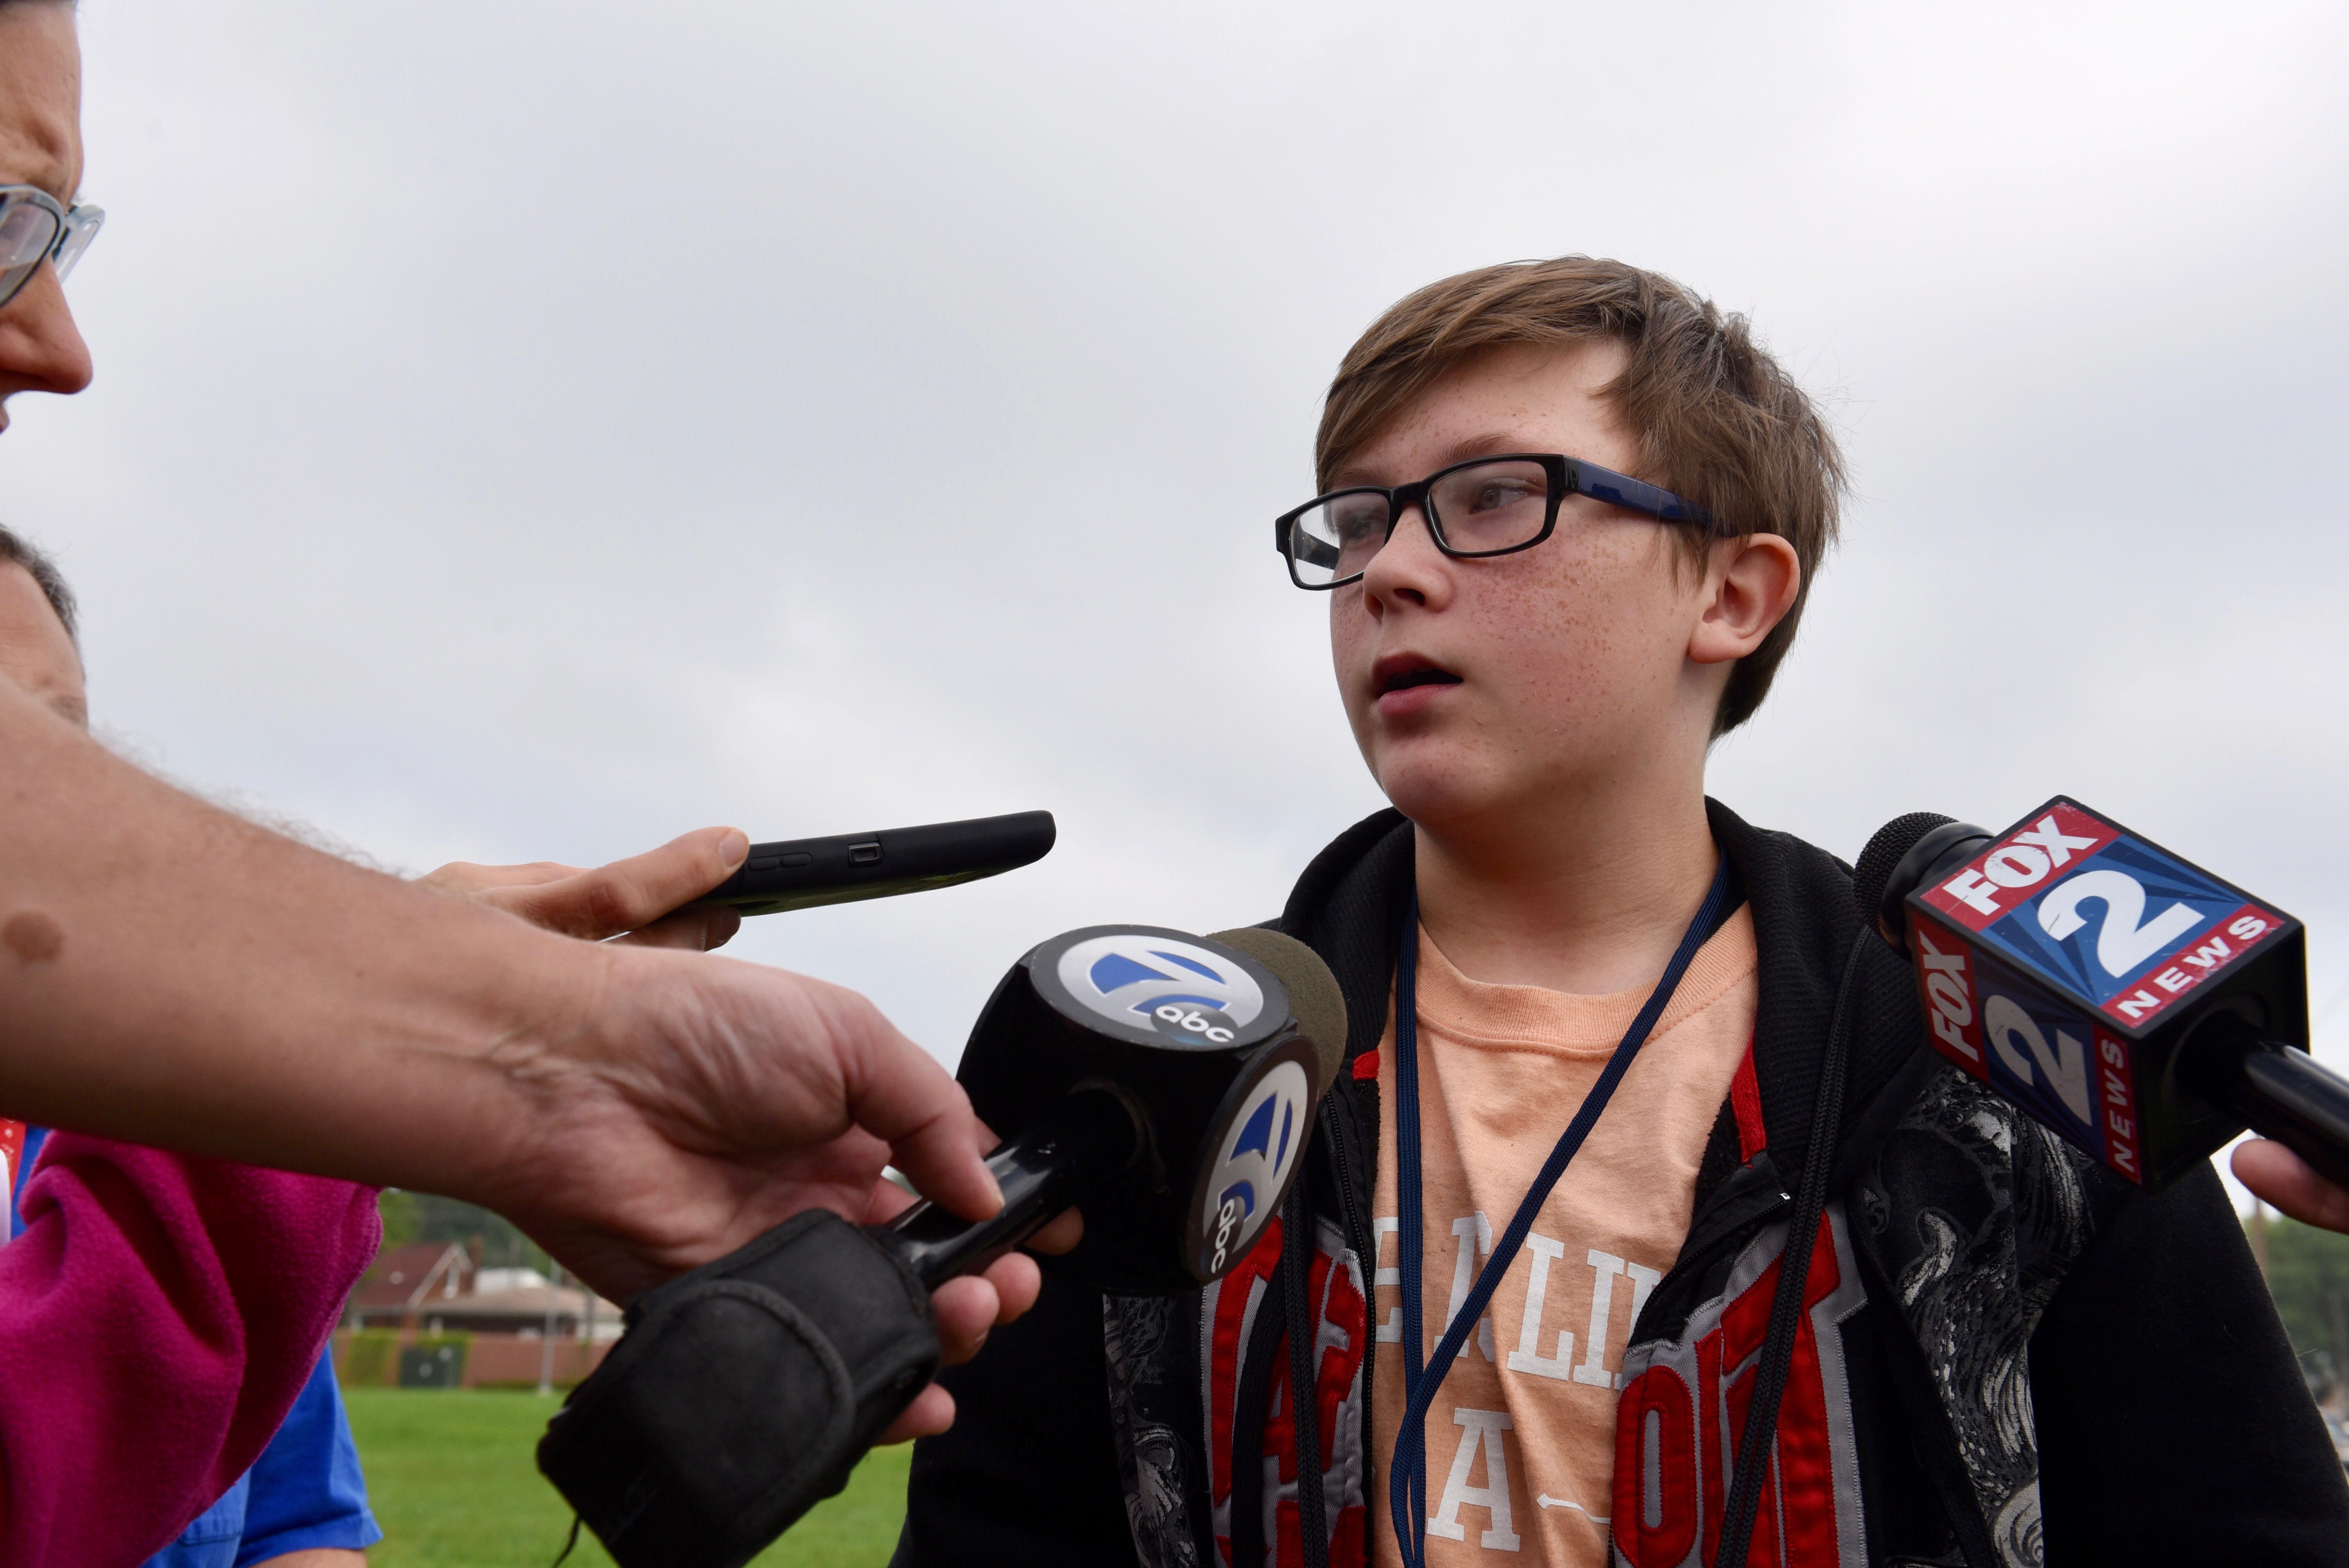 Warren Fitzgerald High School student Evan Lipscomb, 14,  said he was in band class when officials announced the school was on lockdown over the PA system. 
"The teacher started locking the doors," he said as he was walking home at about 10:30 after being released for the day.